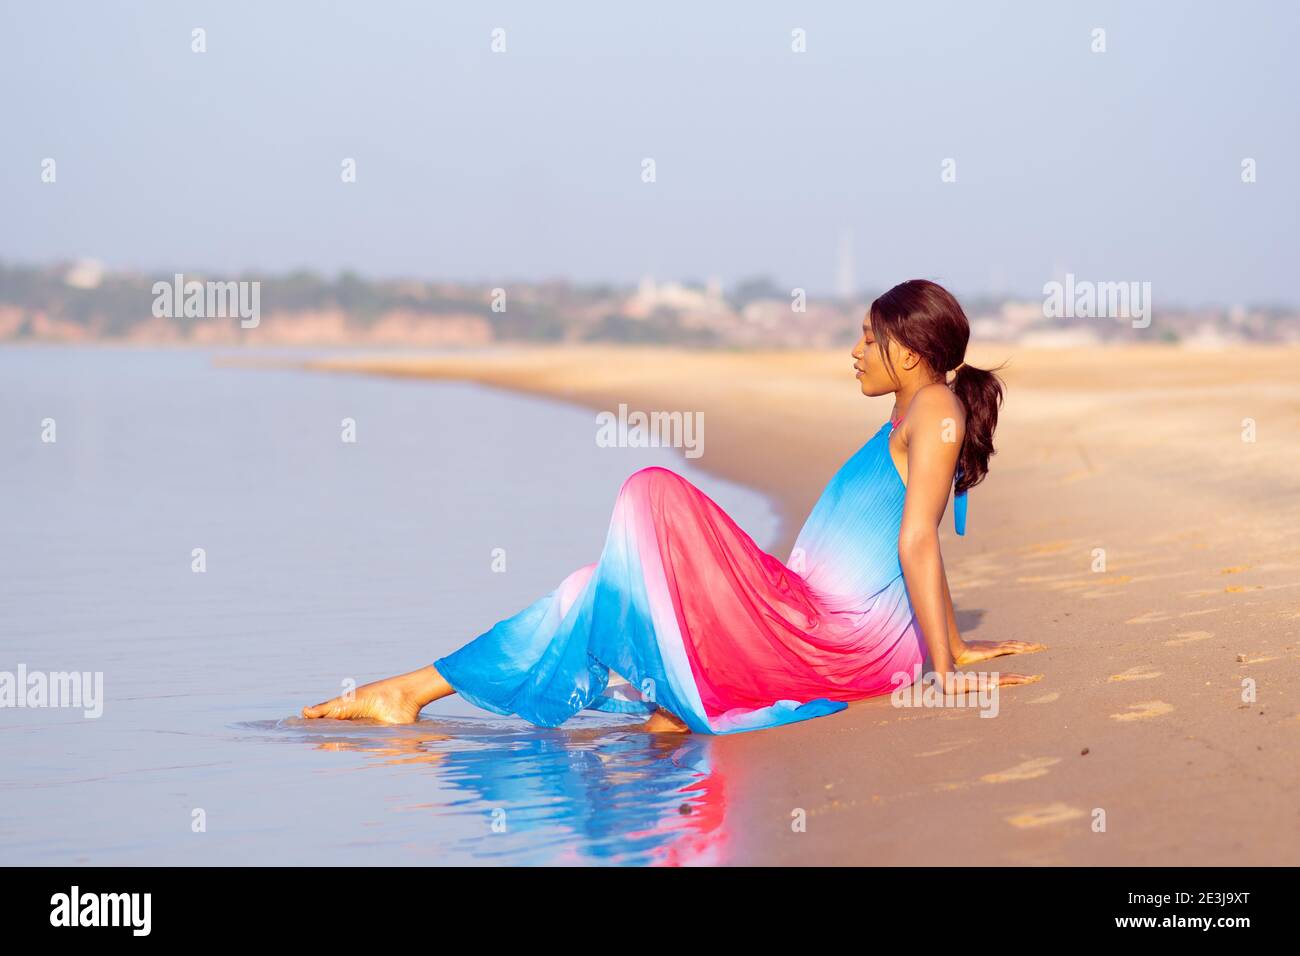 beautiful young african woman wearing a very colorful dress sitting on a beach alone and playing with the water with her feet Stock Photo